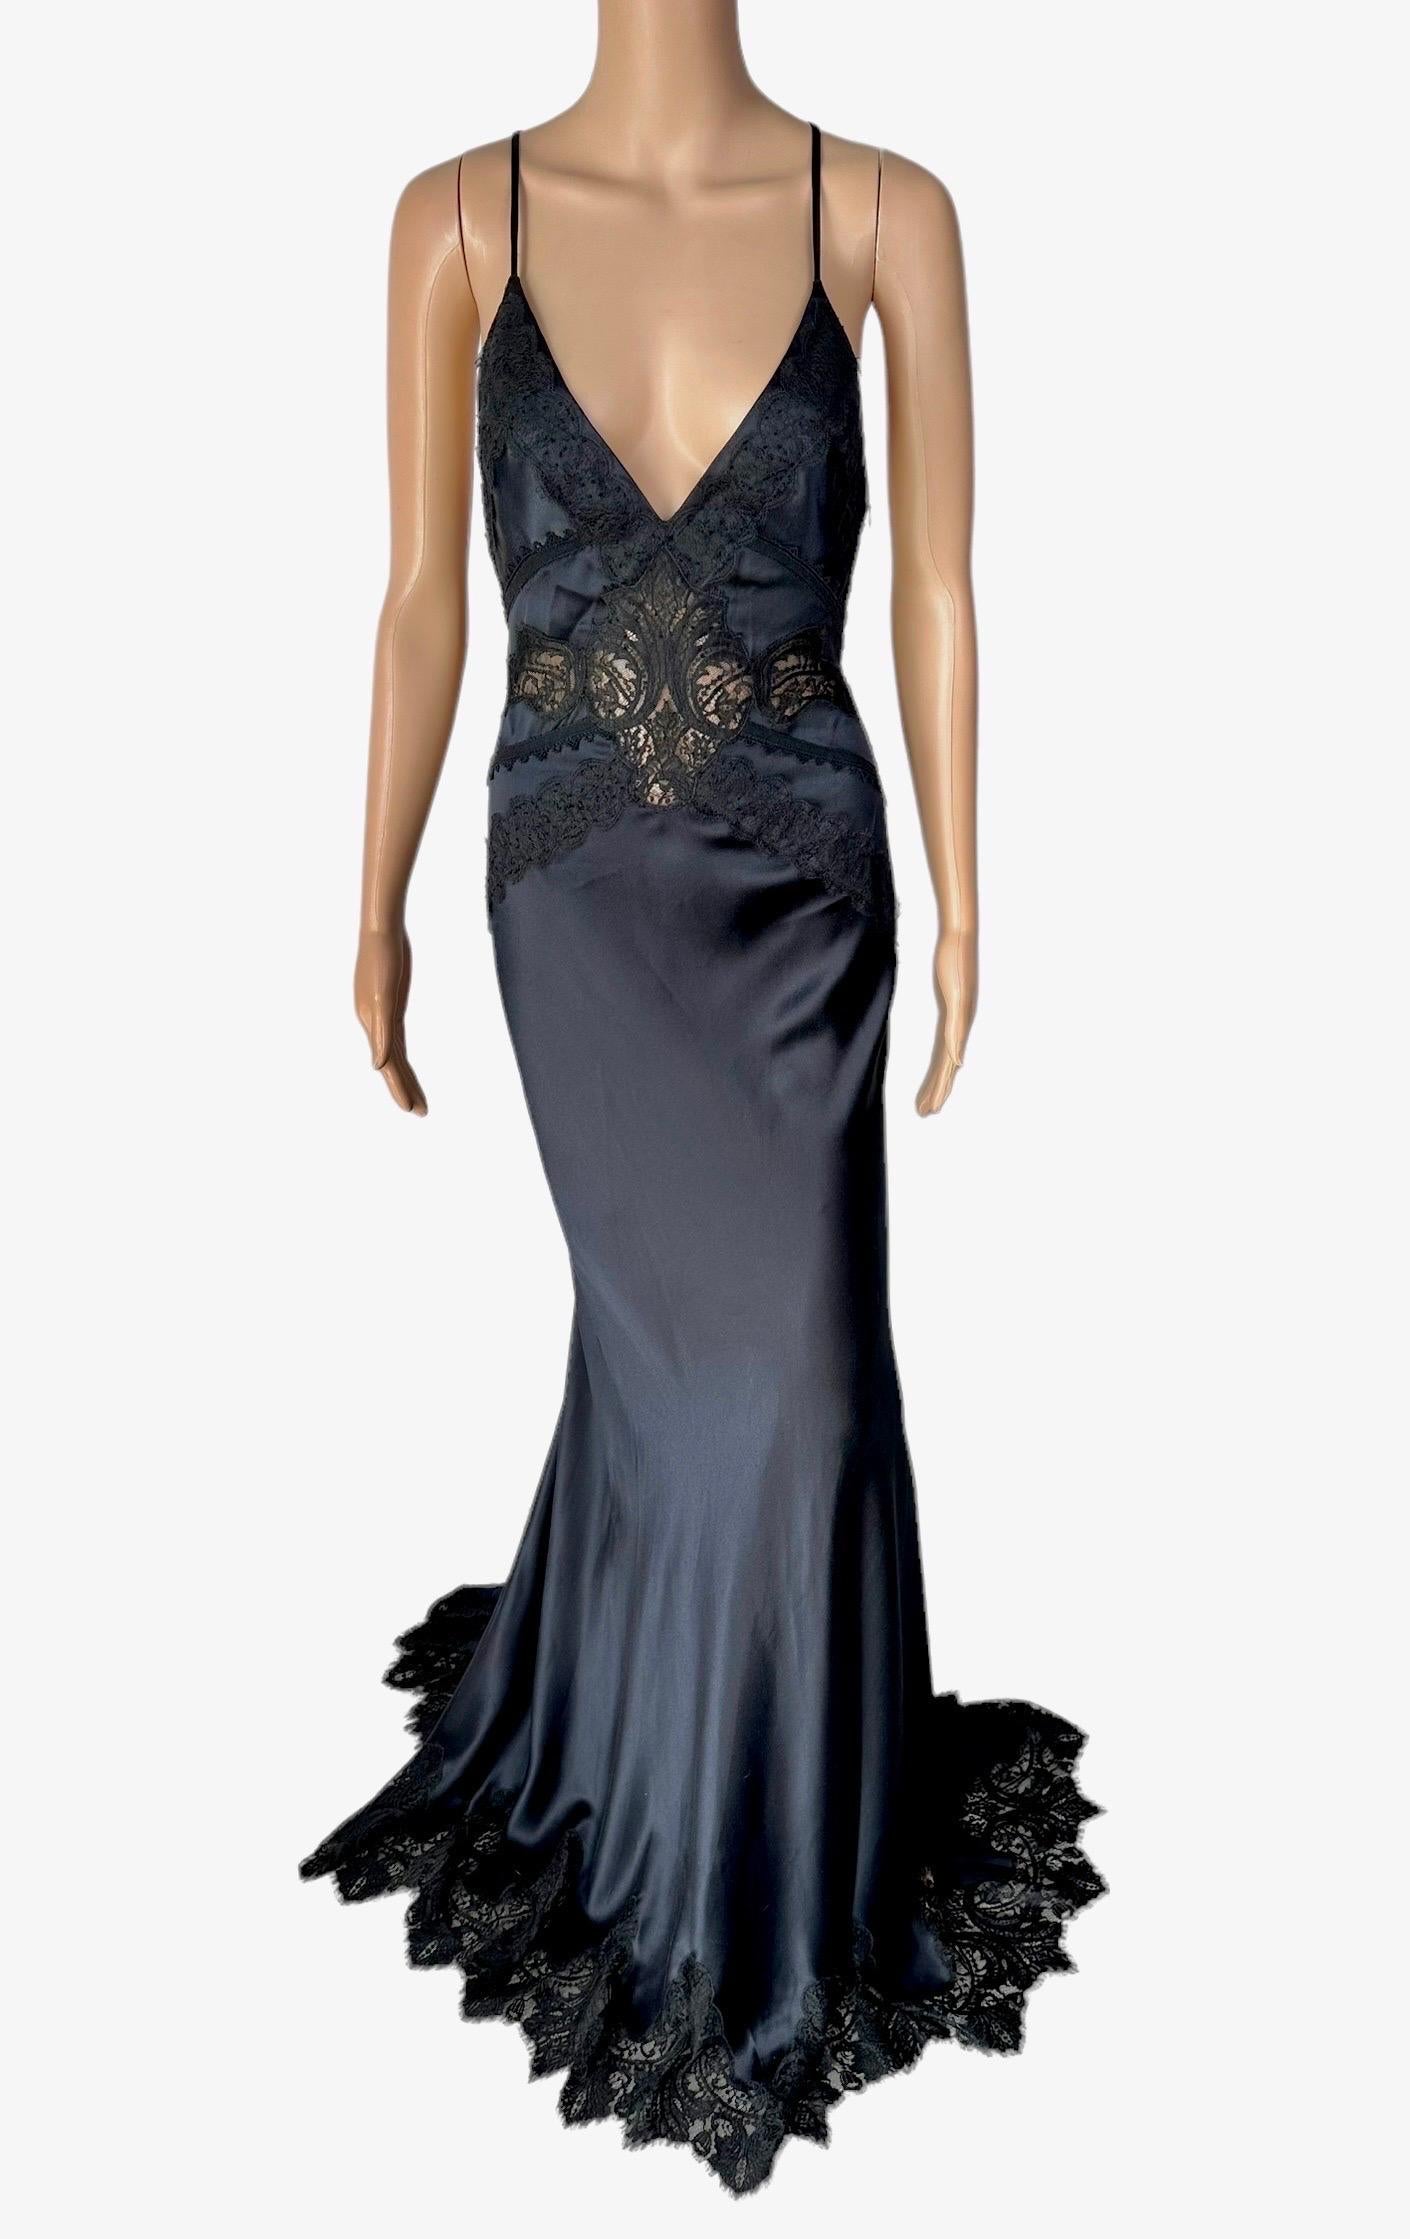 Versace c.2006 Plunging Neckline Sheer Lace Panels Backless Evening Dress Gown  In Good Condition For Sale In Naples, FL